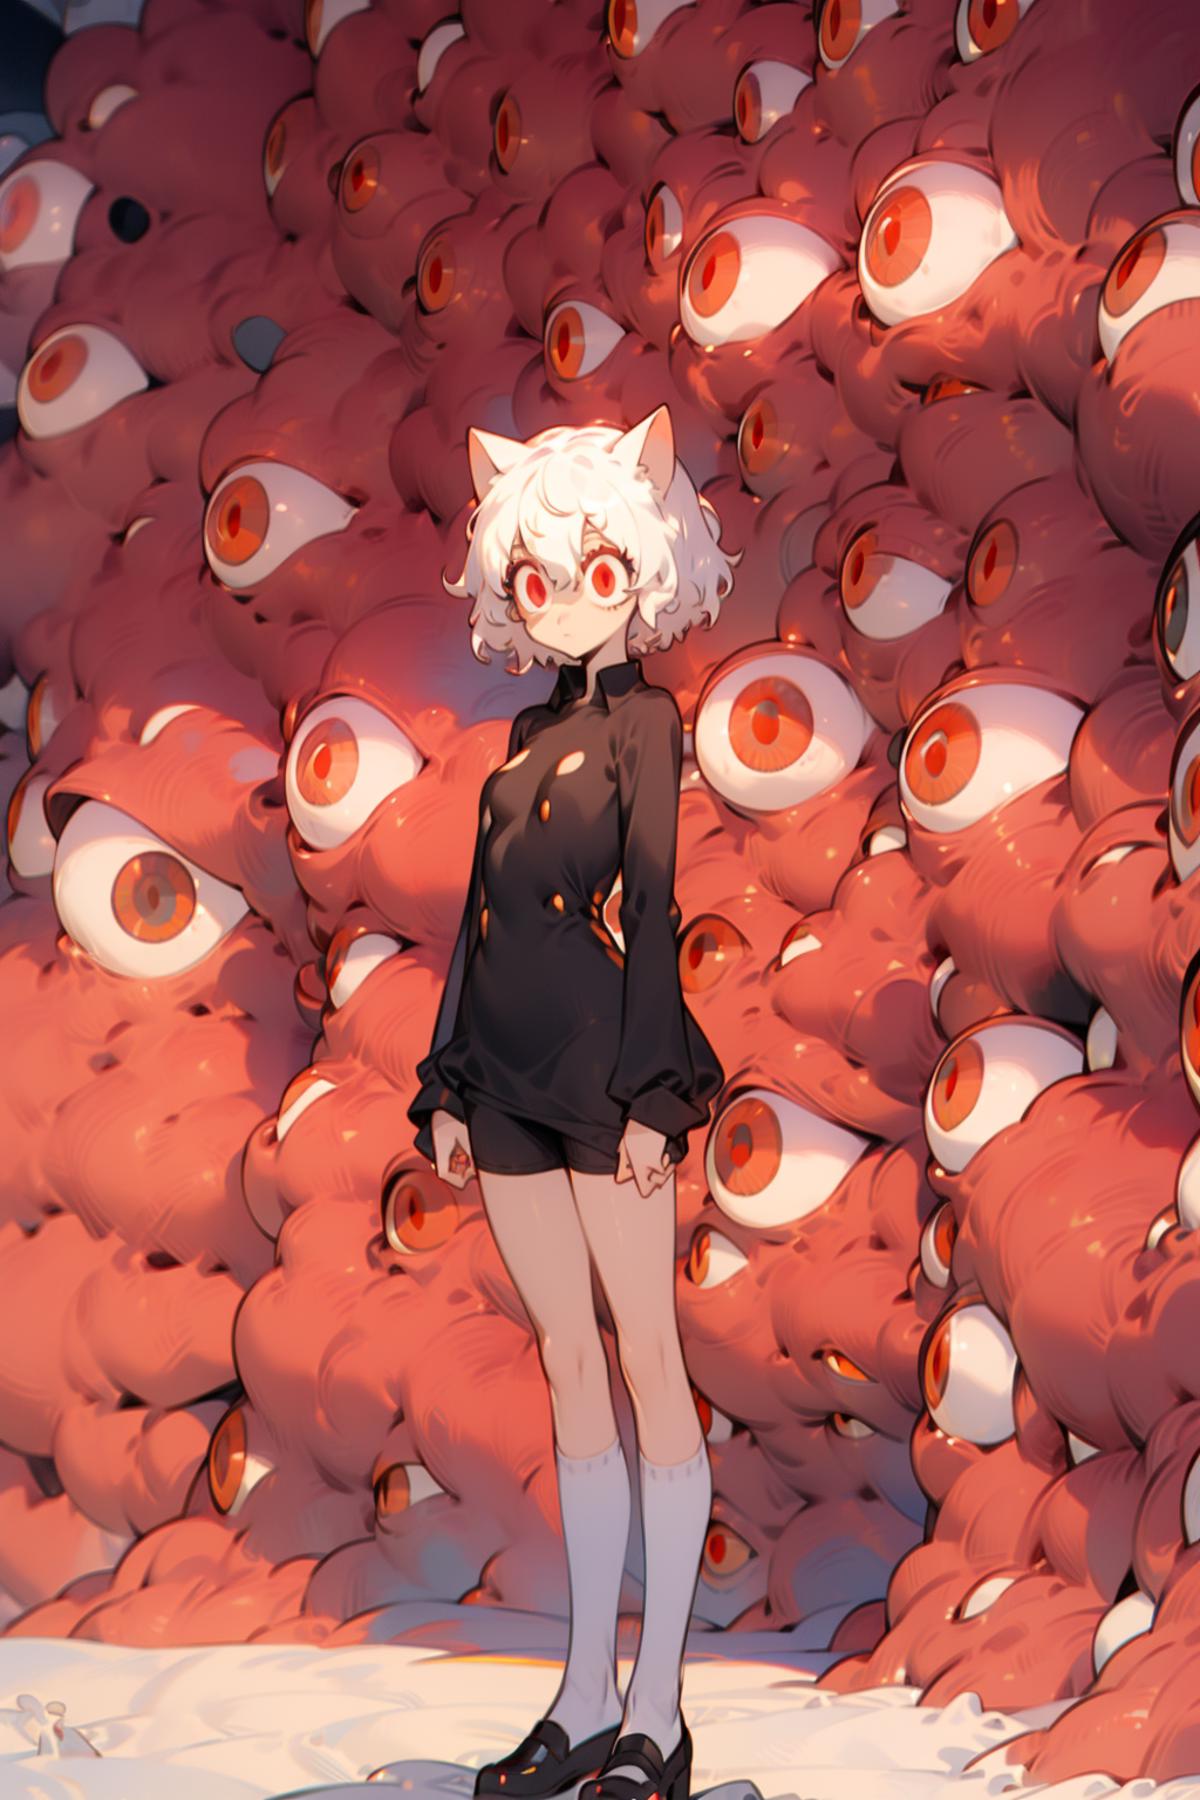 A girl with white hair and a short skirt standing in front of a large red eye wallpaper.